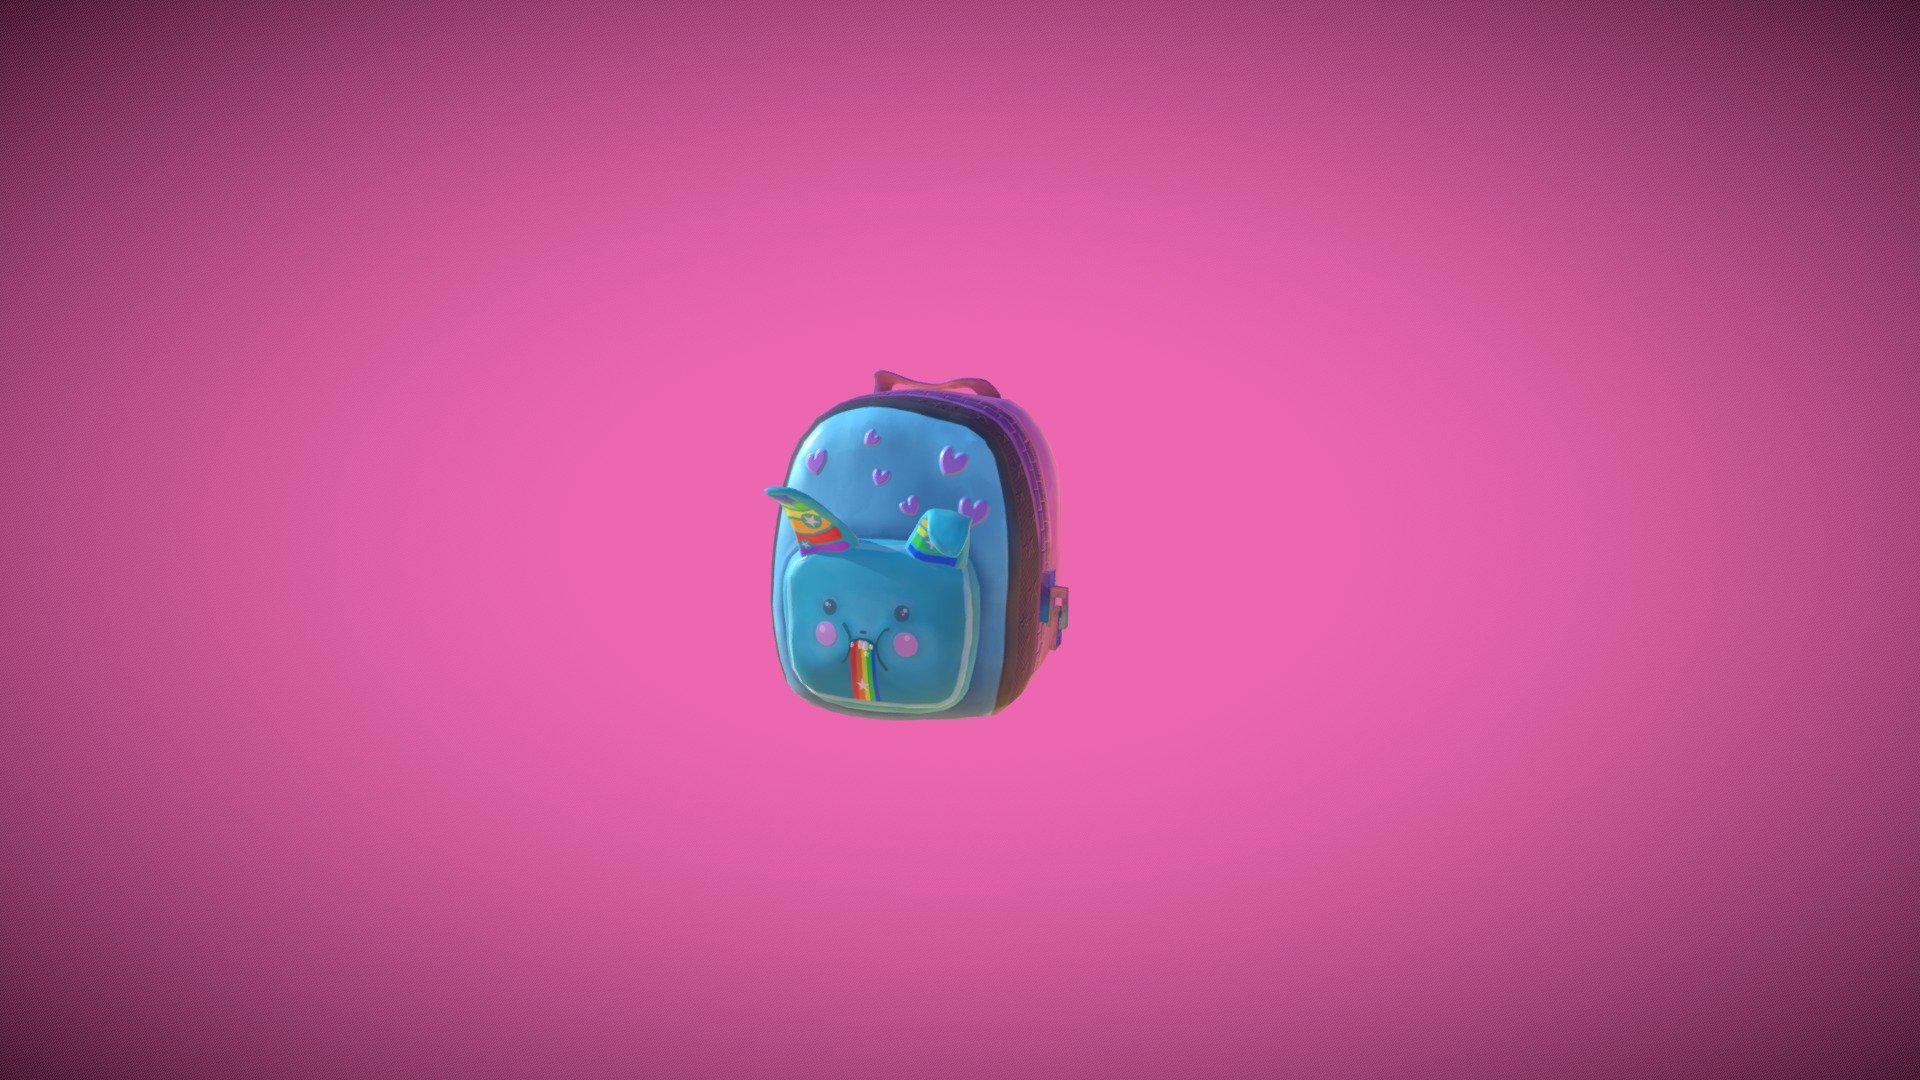 Back bling inspired by the Brite bomber range, wanted to recreate one of my own designs using the Fortnite style - Fortnite Fan Art - Back Bling - 3D model by StanleyBarrett (@rinixx) 3d model